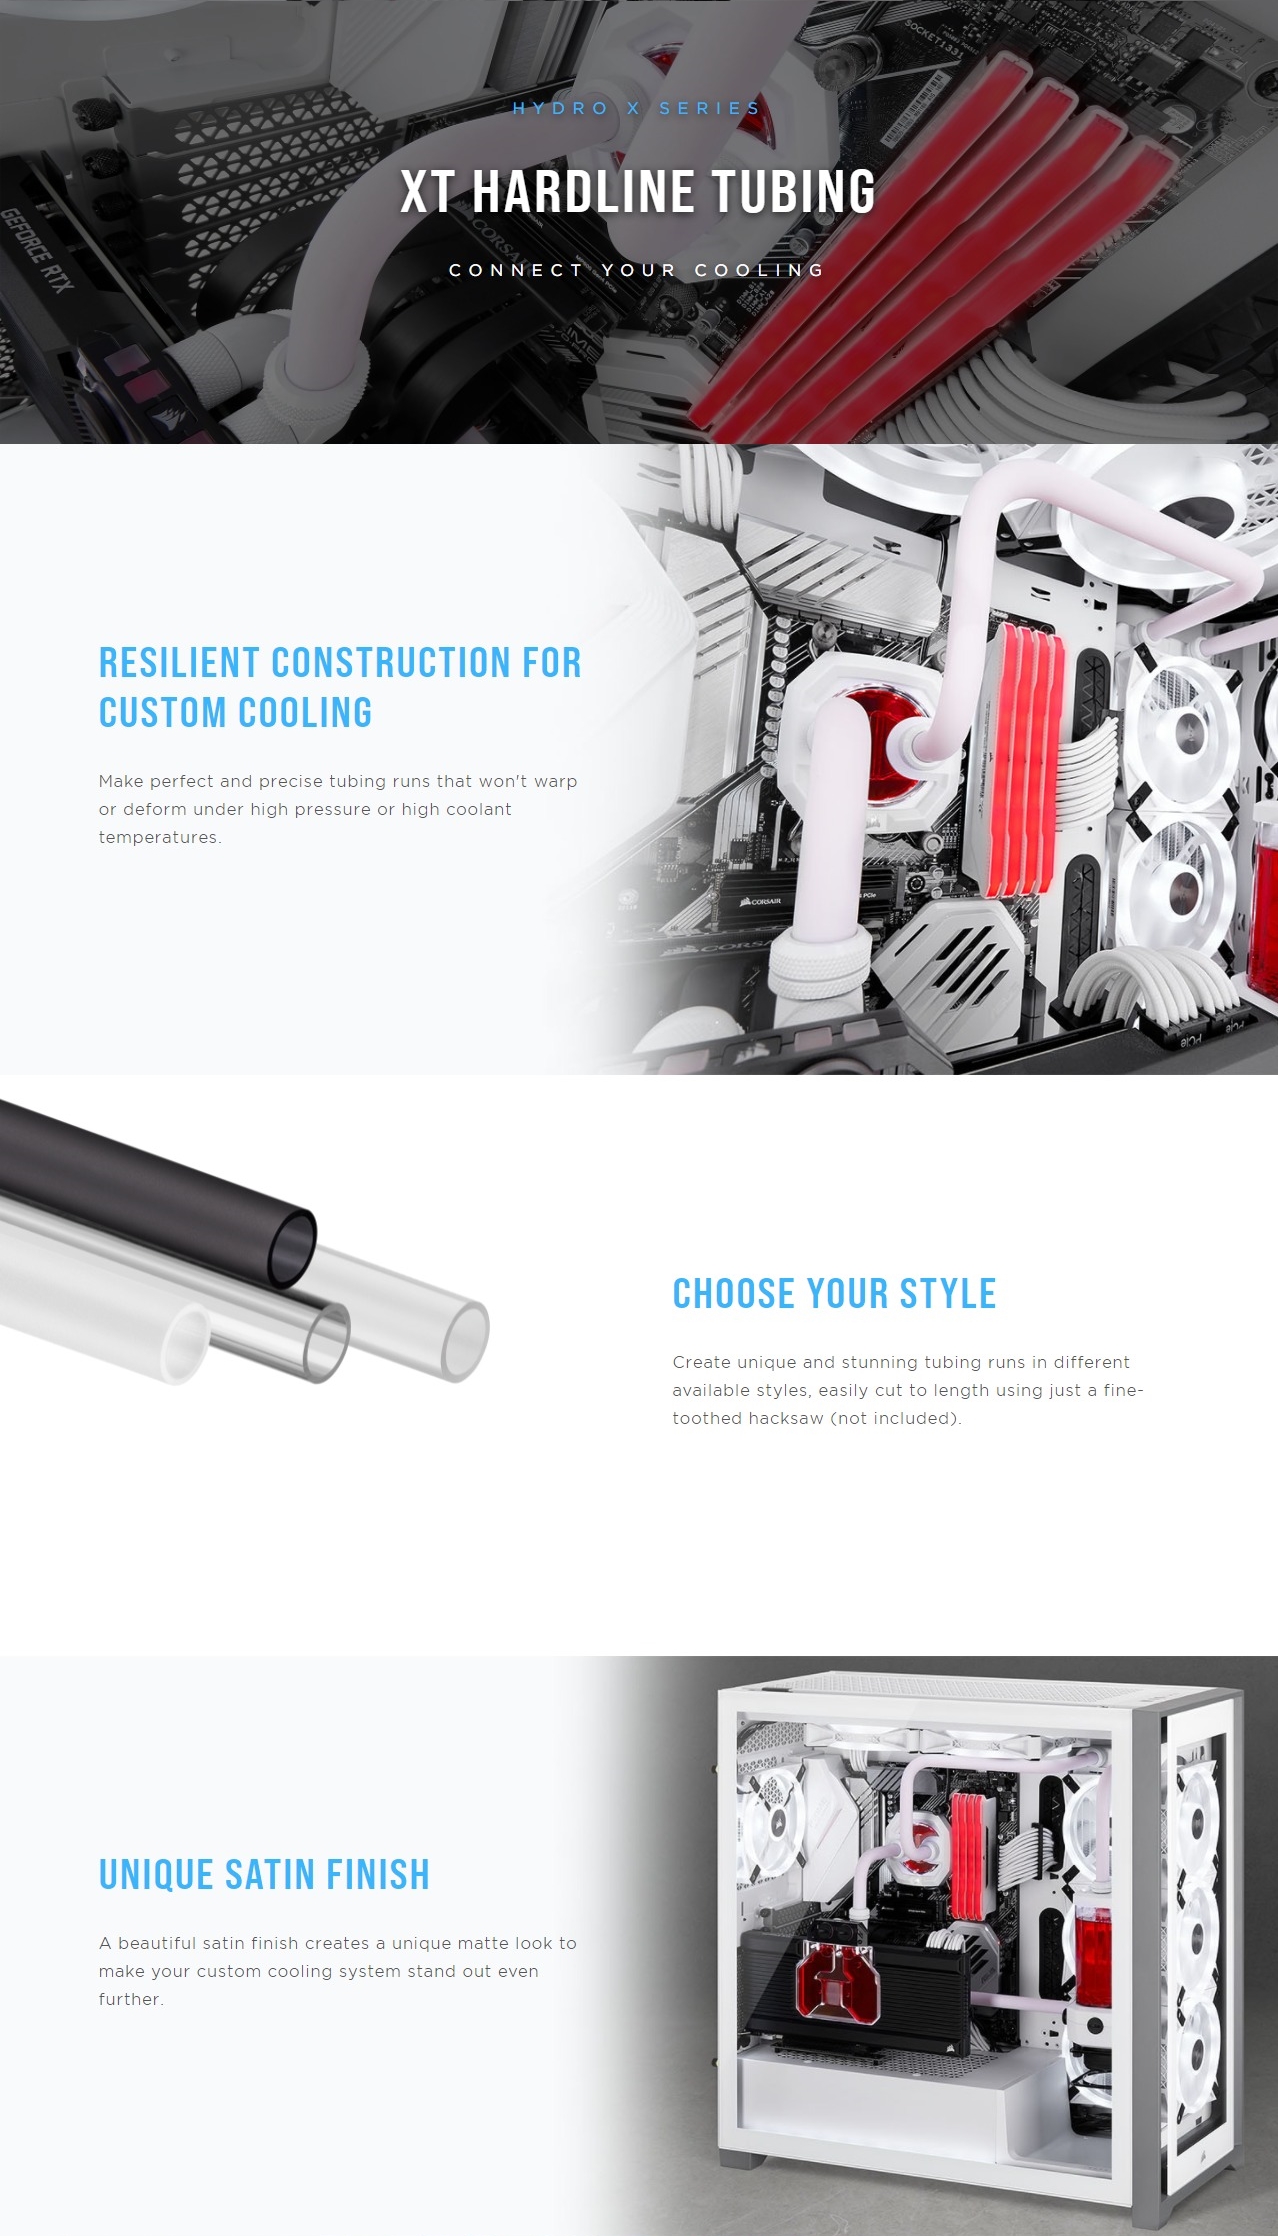 A large marketing image providing additional information about the product Corsair Hydro X Series XT Hardline Tubing 10/12mm 1m (3pcs) - Satin White - Additional alt info not provided